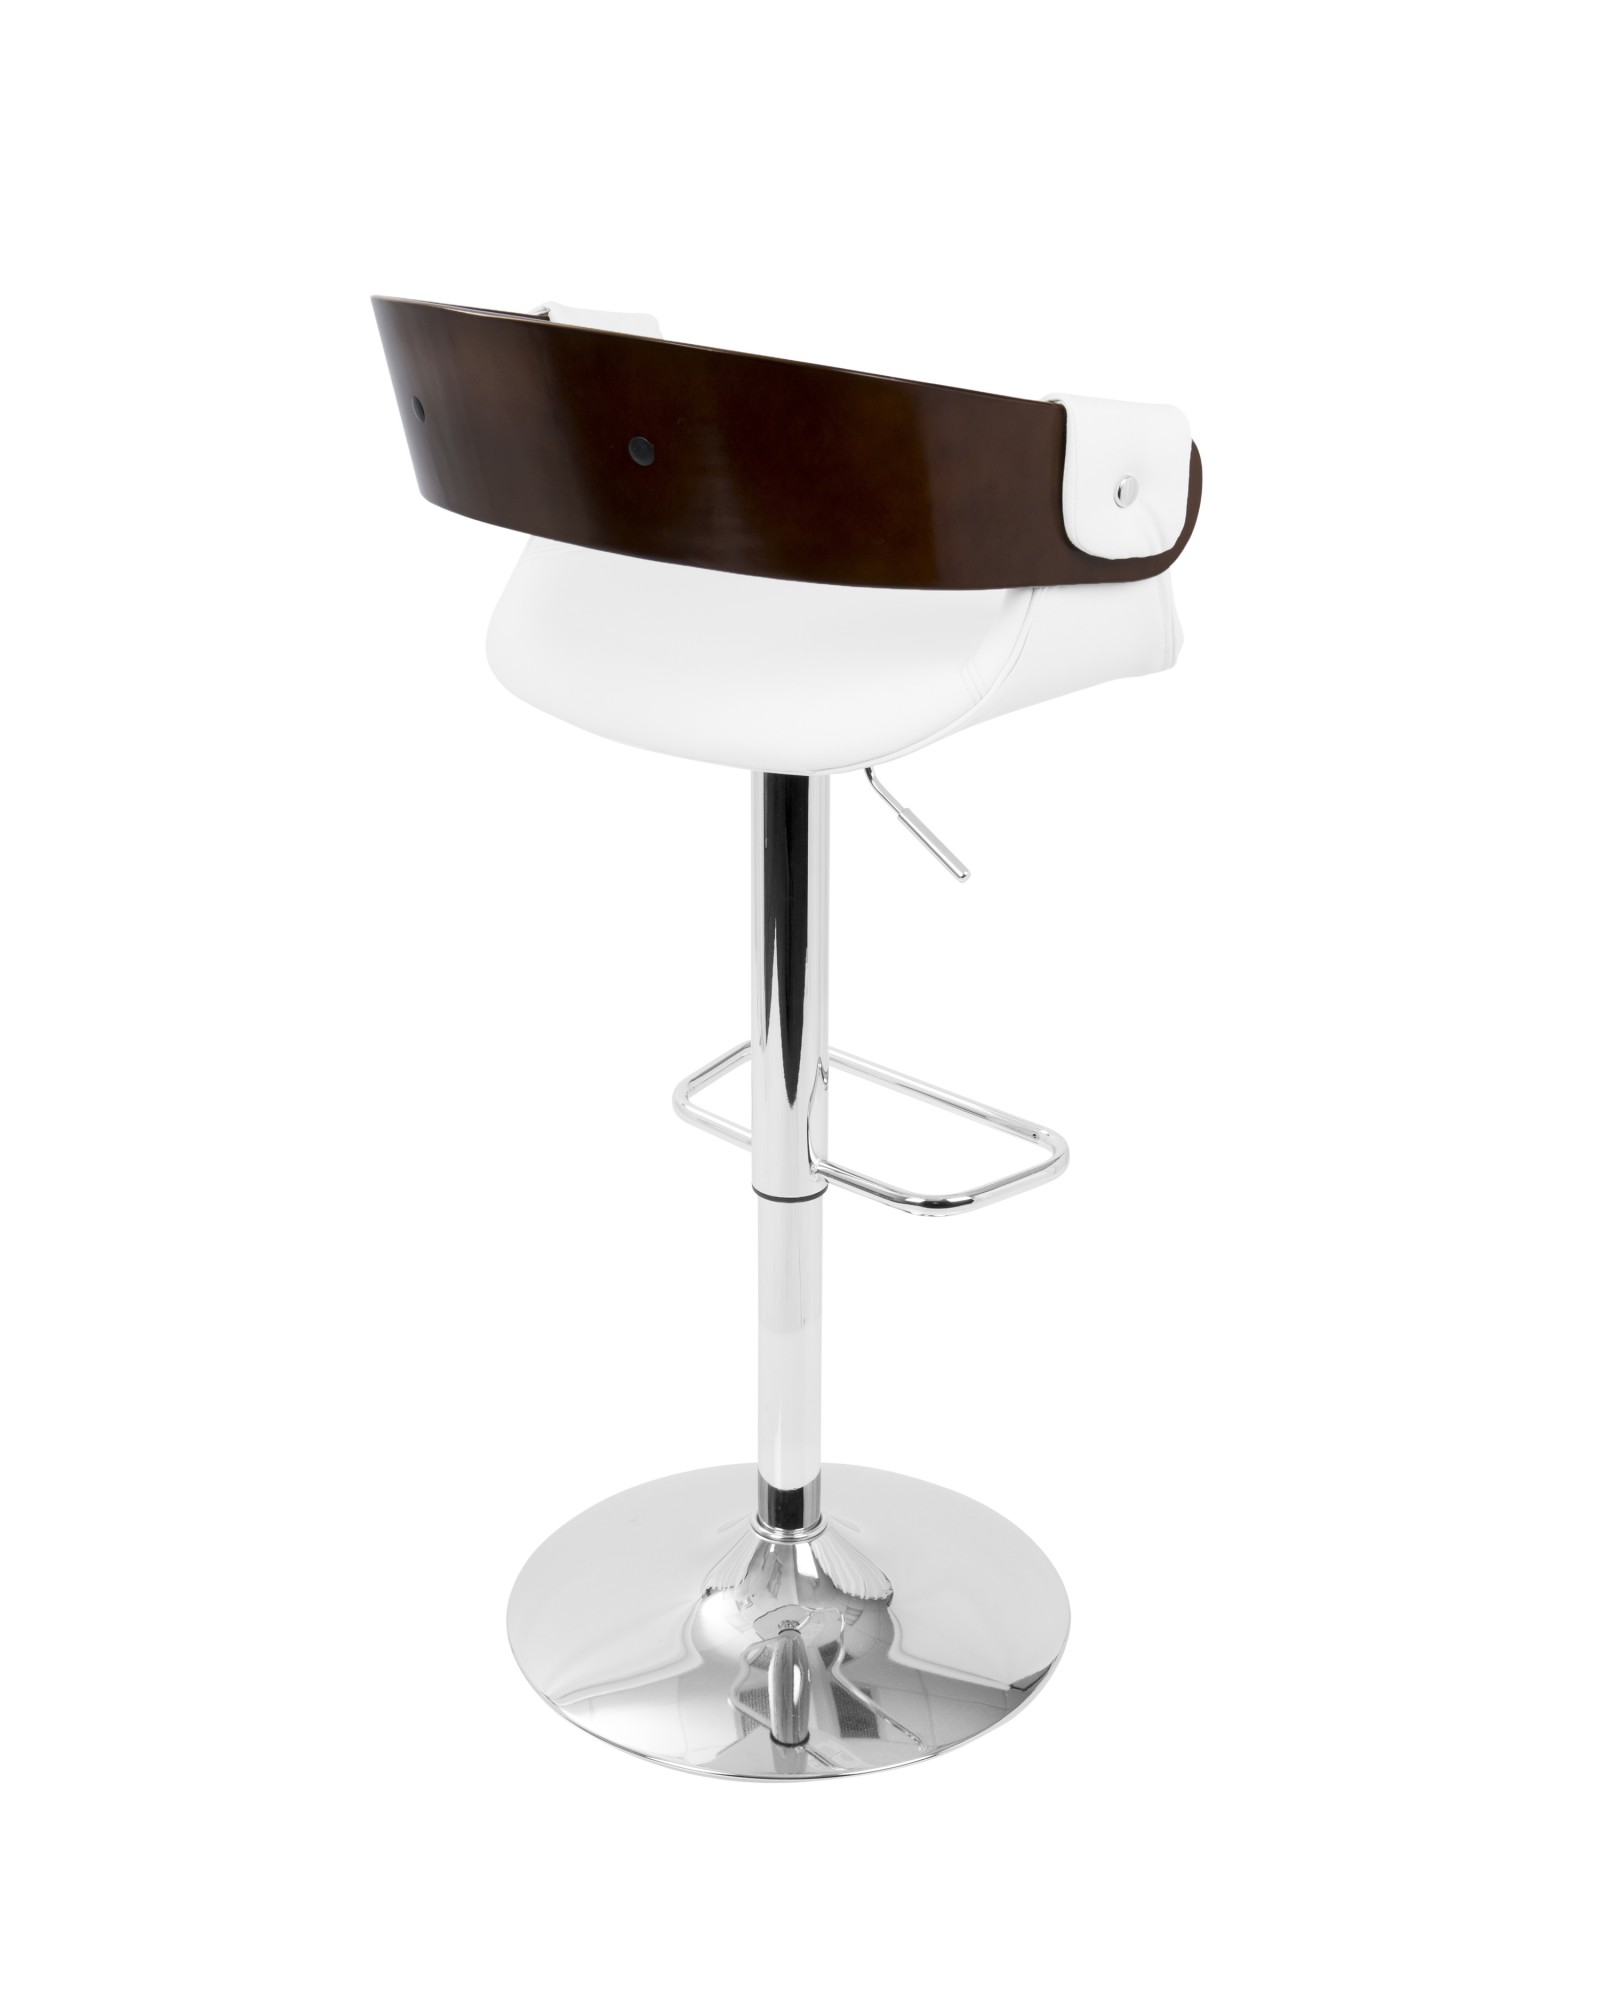 Envi Mid-Century Modern Adjustable Barstool in Cherry and White